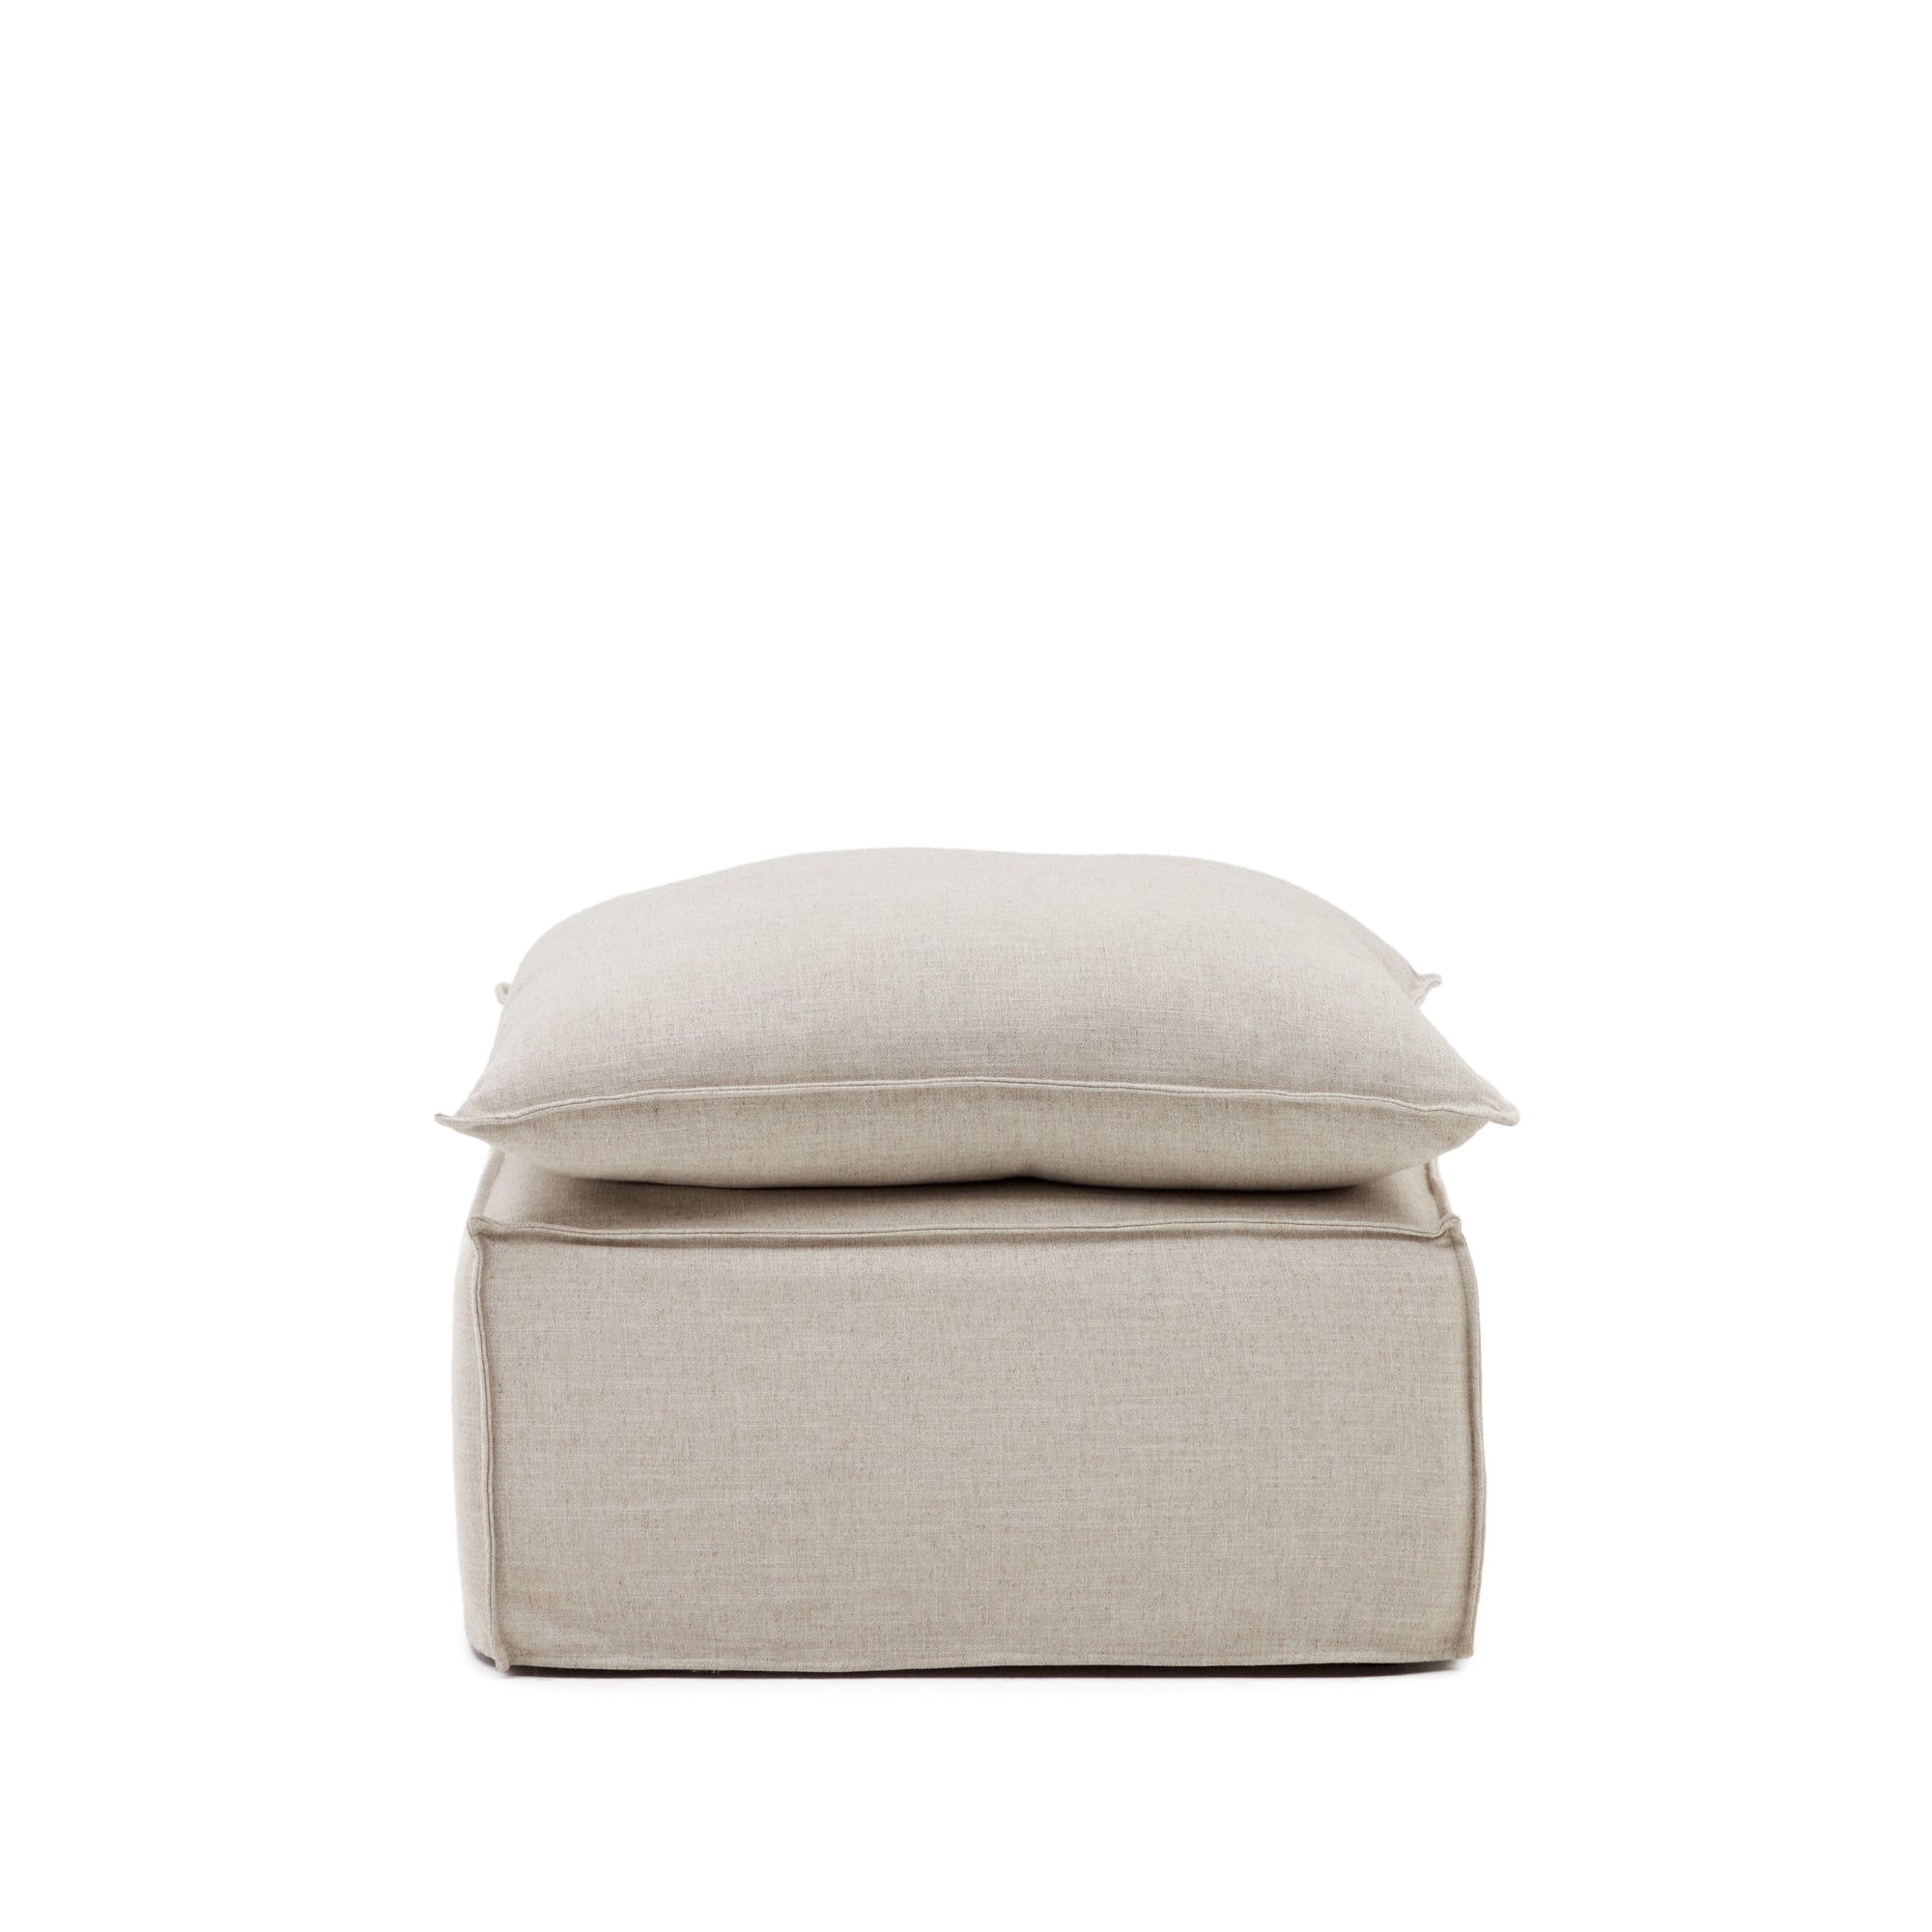 Anarela pouffe with removable cover and beige linen cover 80 x 80 cm